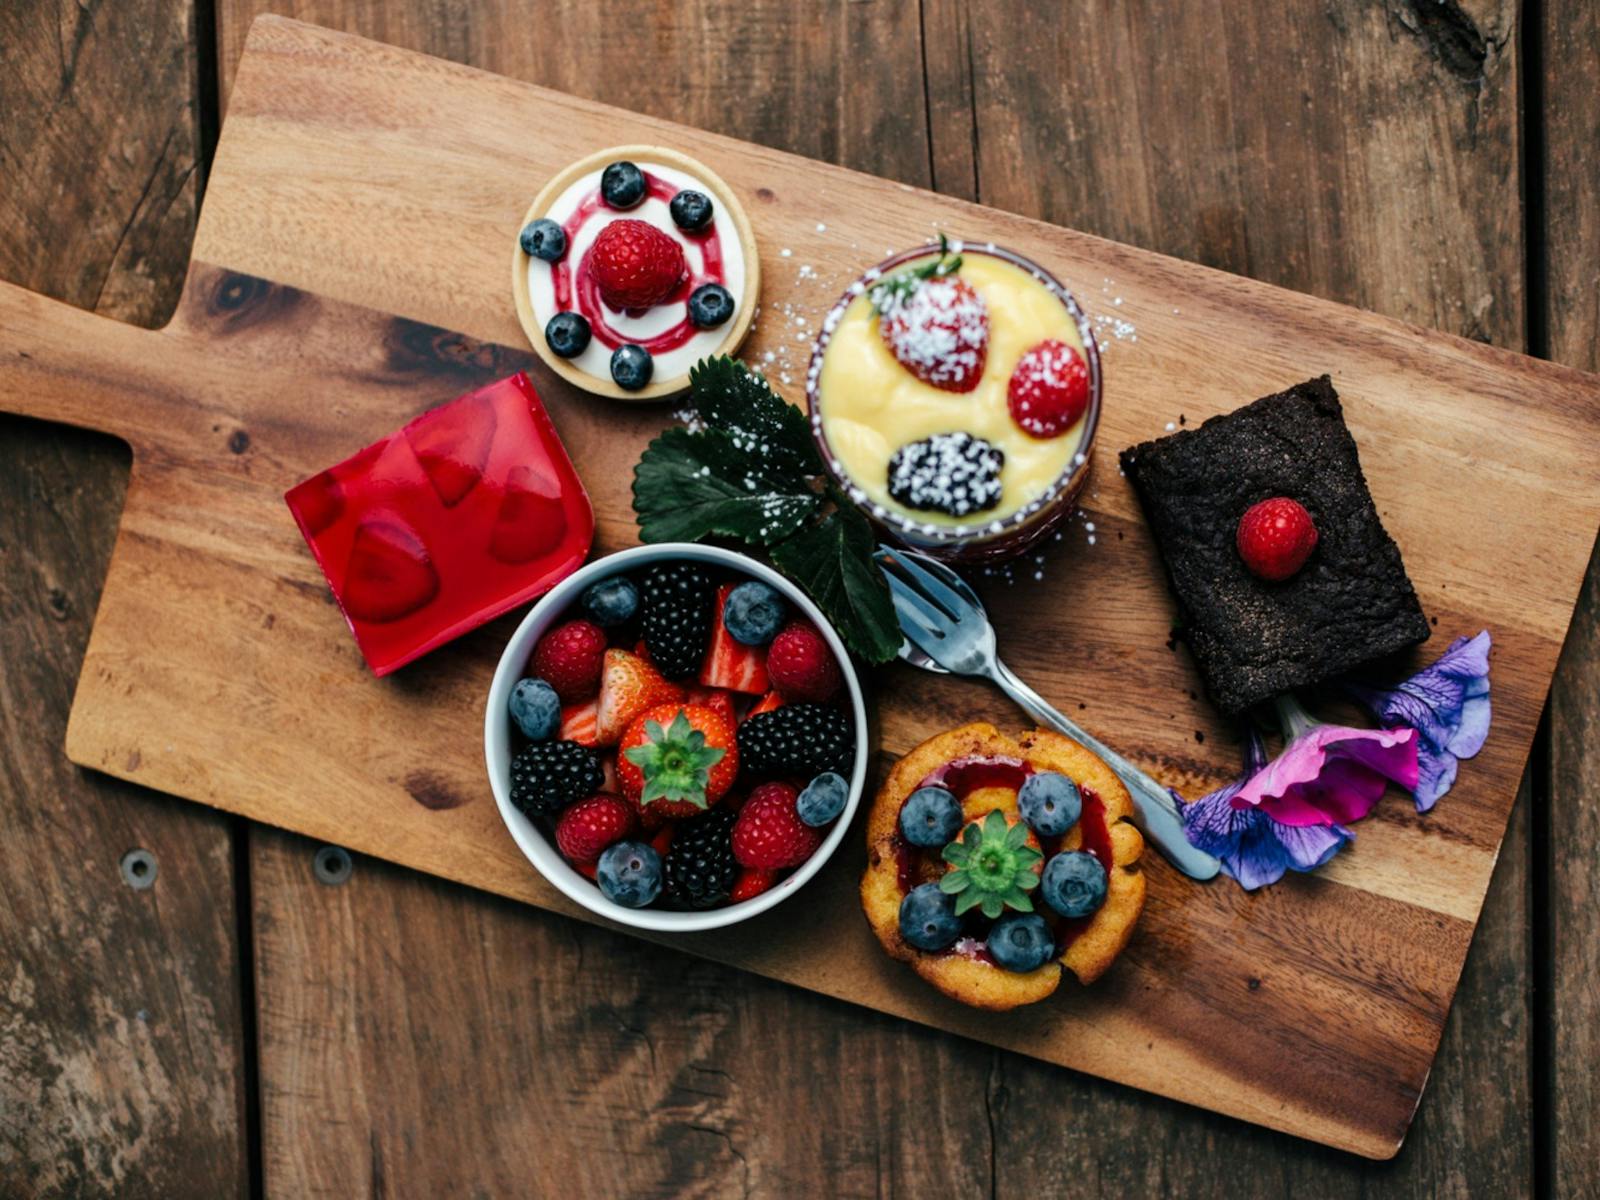 A range of berry inspired desserts.